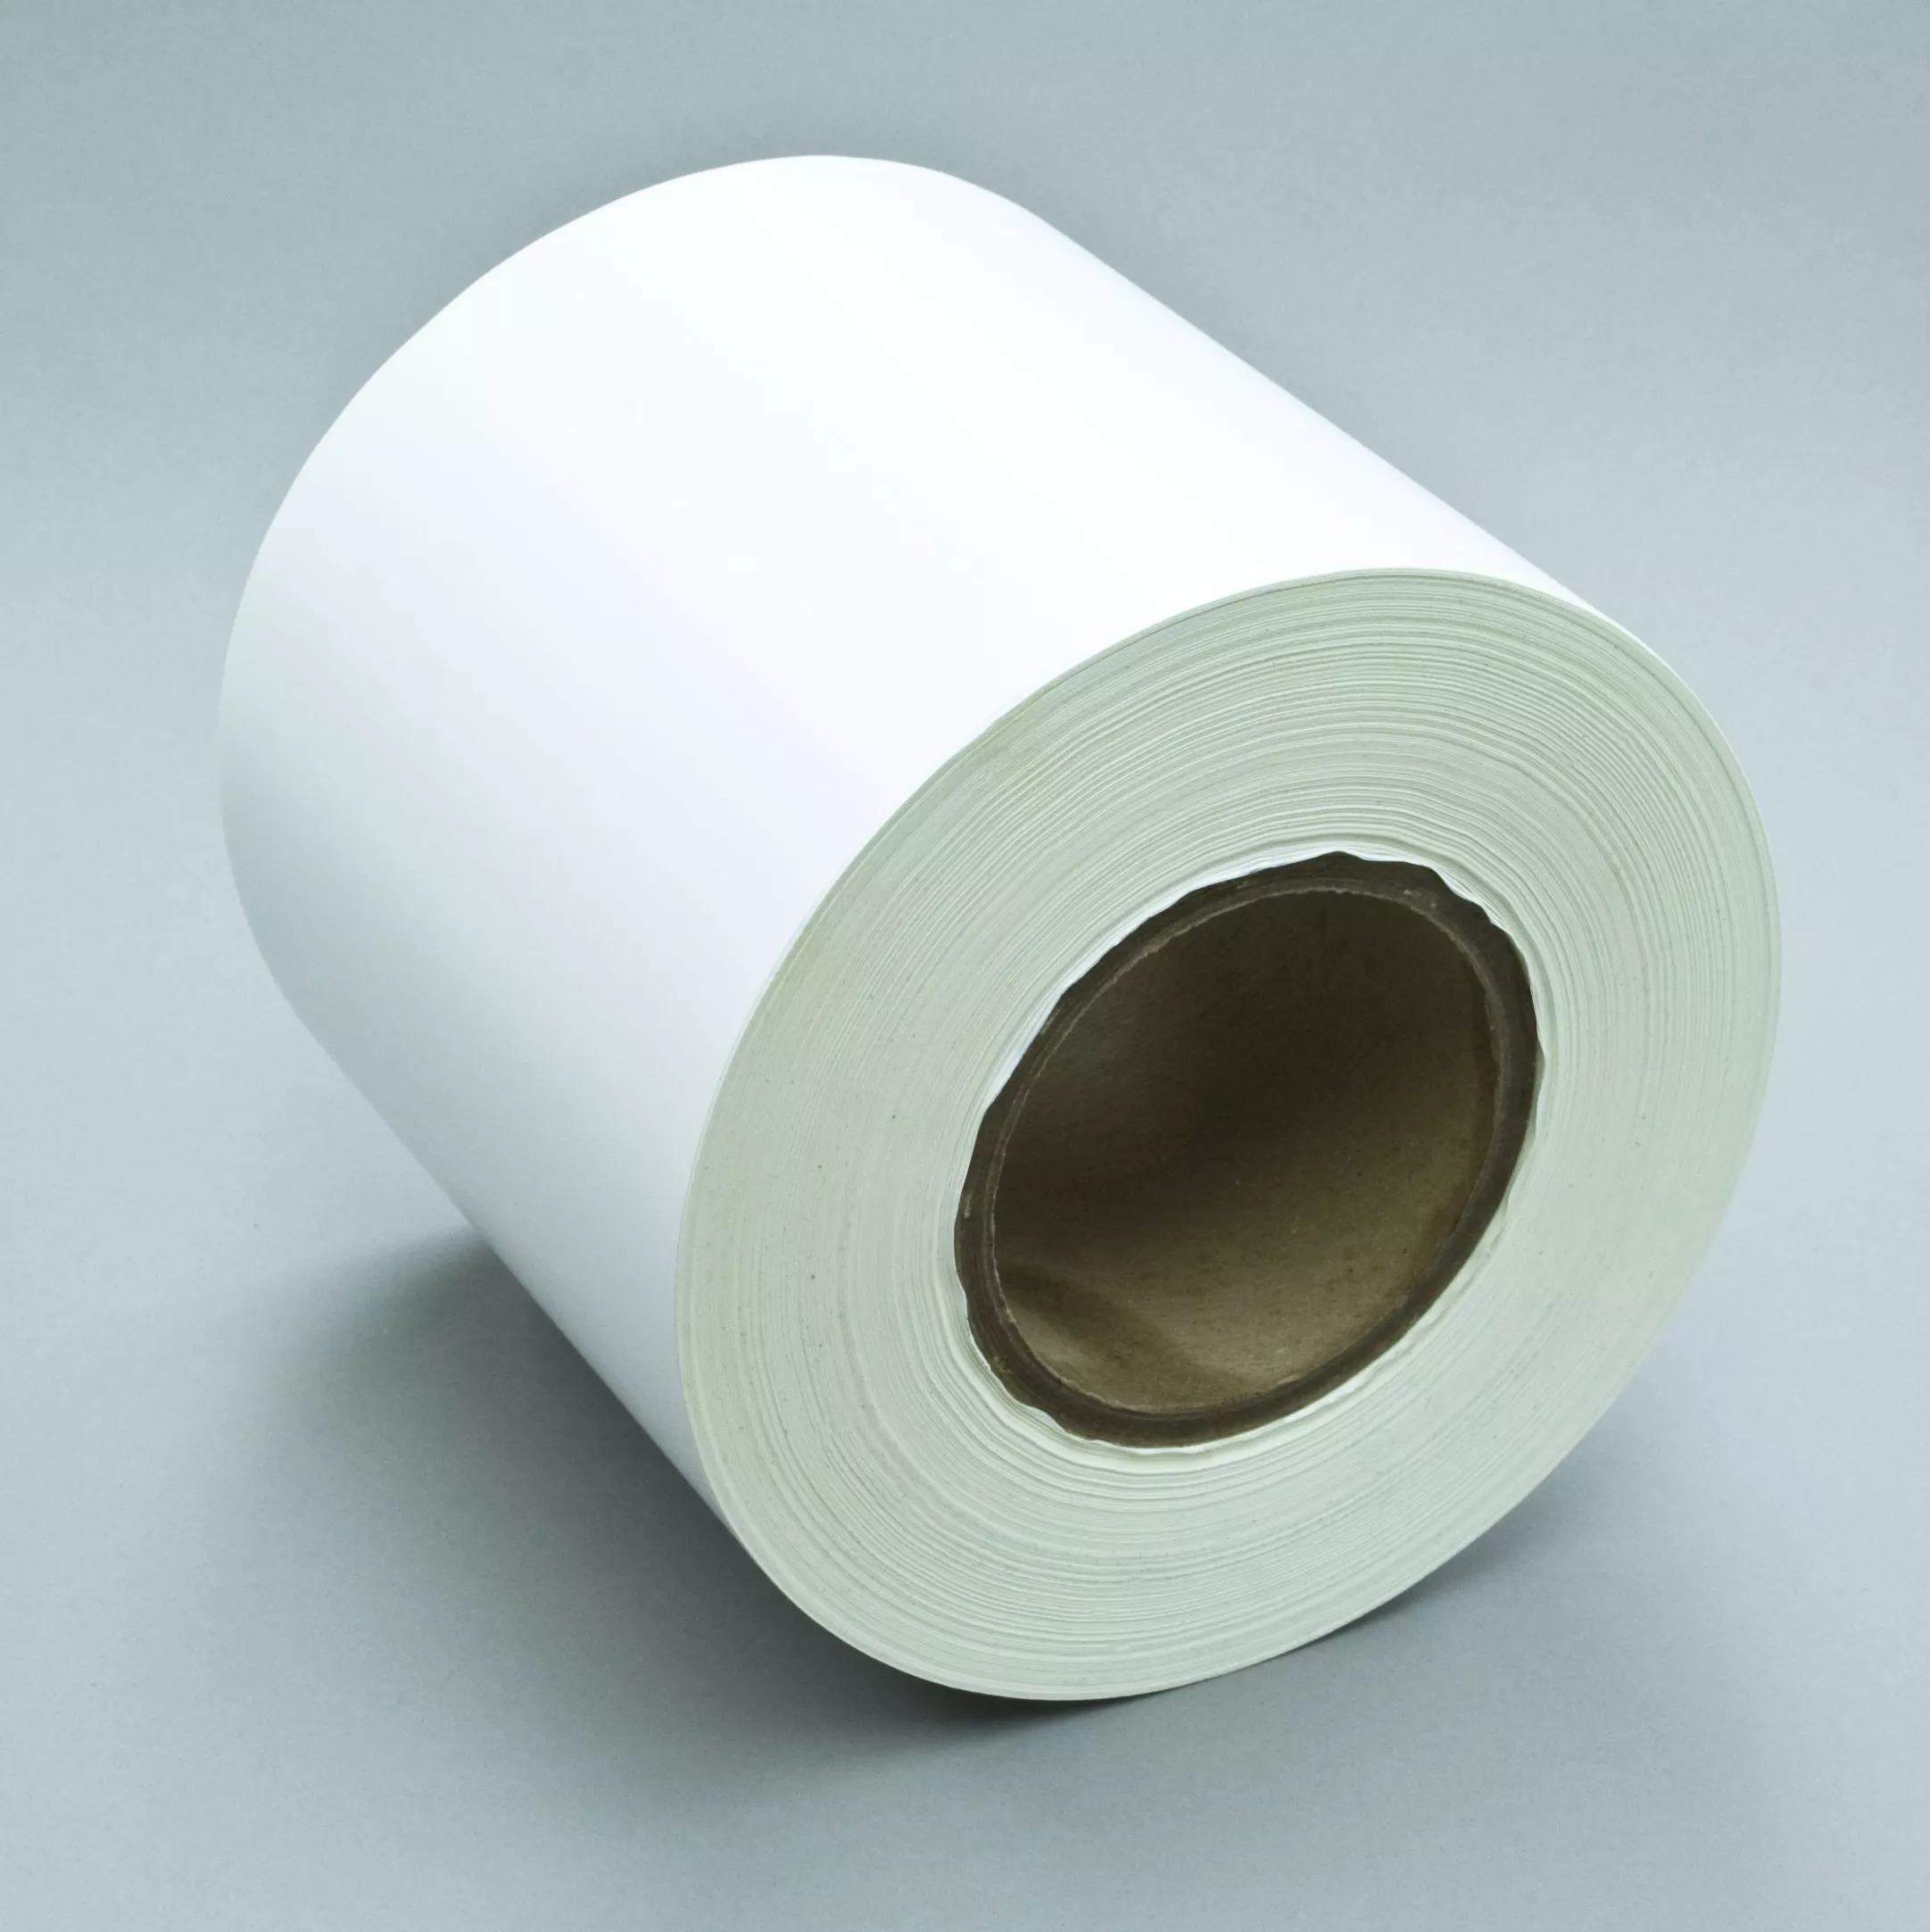 3M™ Sheet and Screen Label Material 7051SA, Soft White EL Vinyl, 20 in x
27 in, 100 Sheets/Case